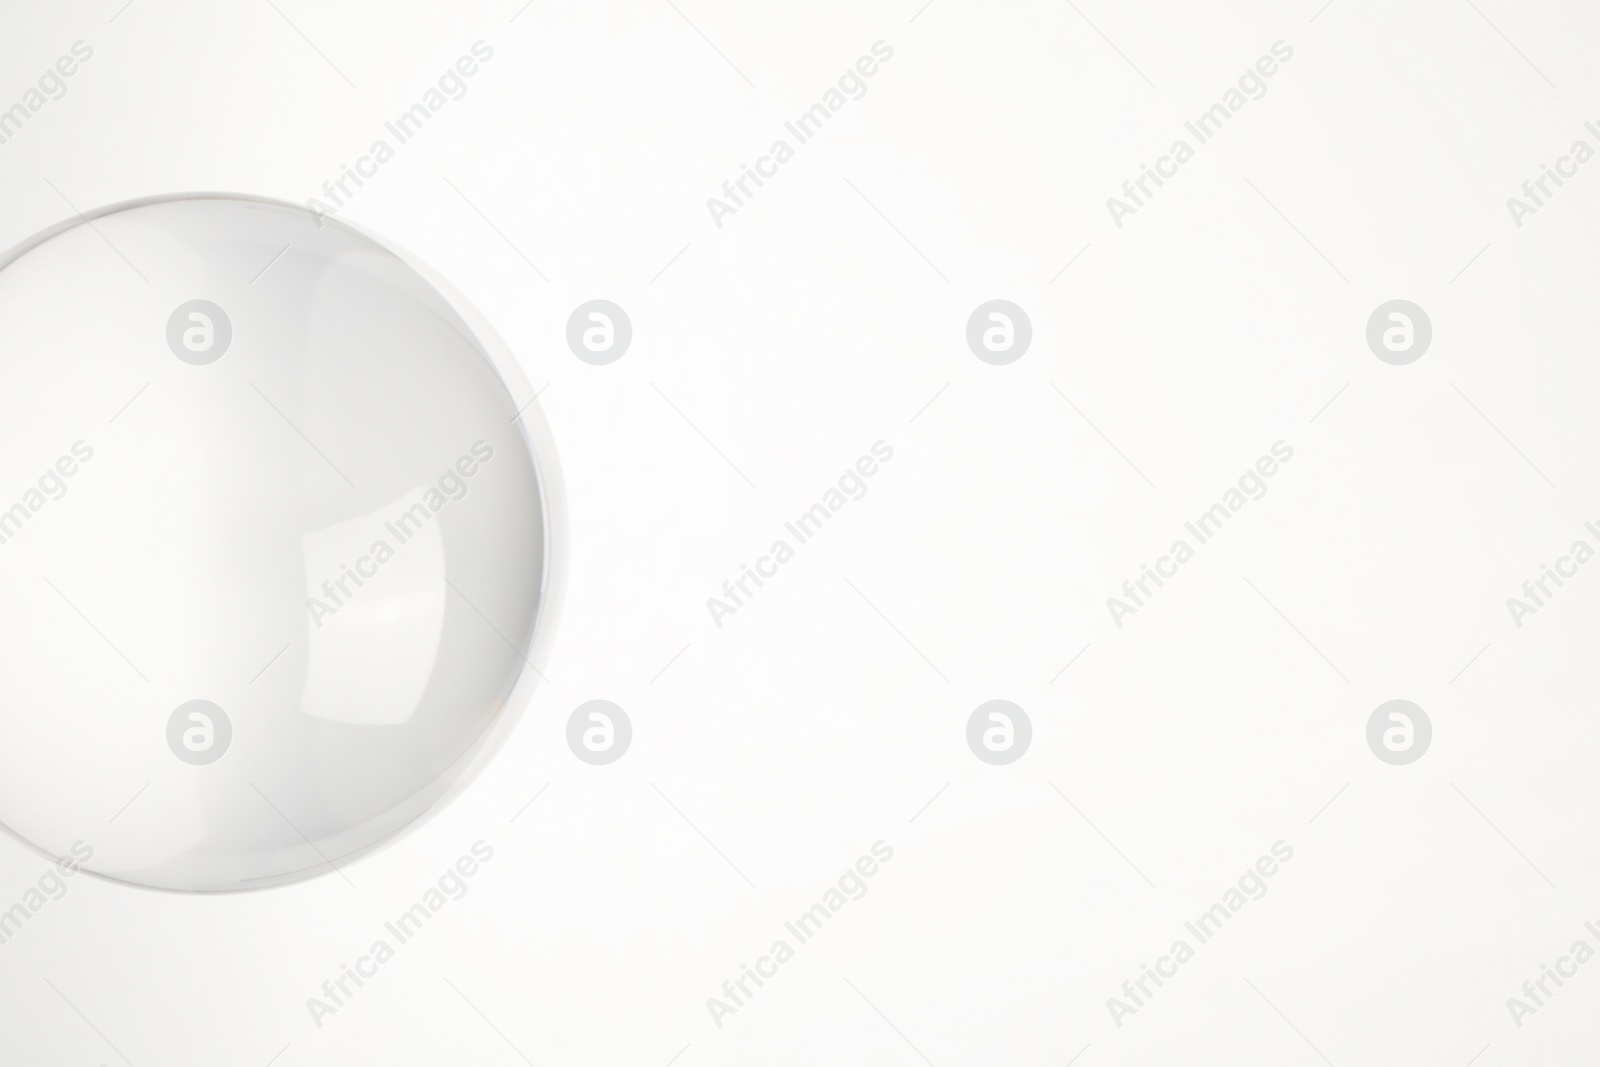 Photo of Transparent glass ball on white background. Space for text